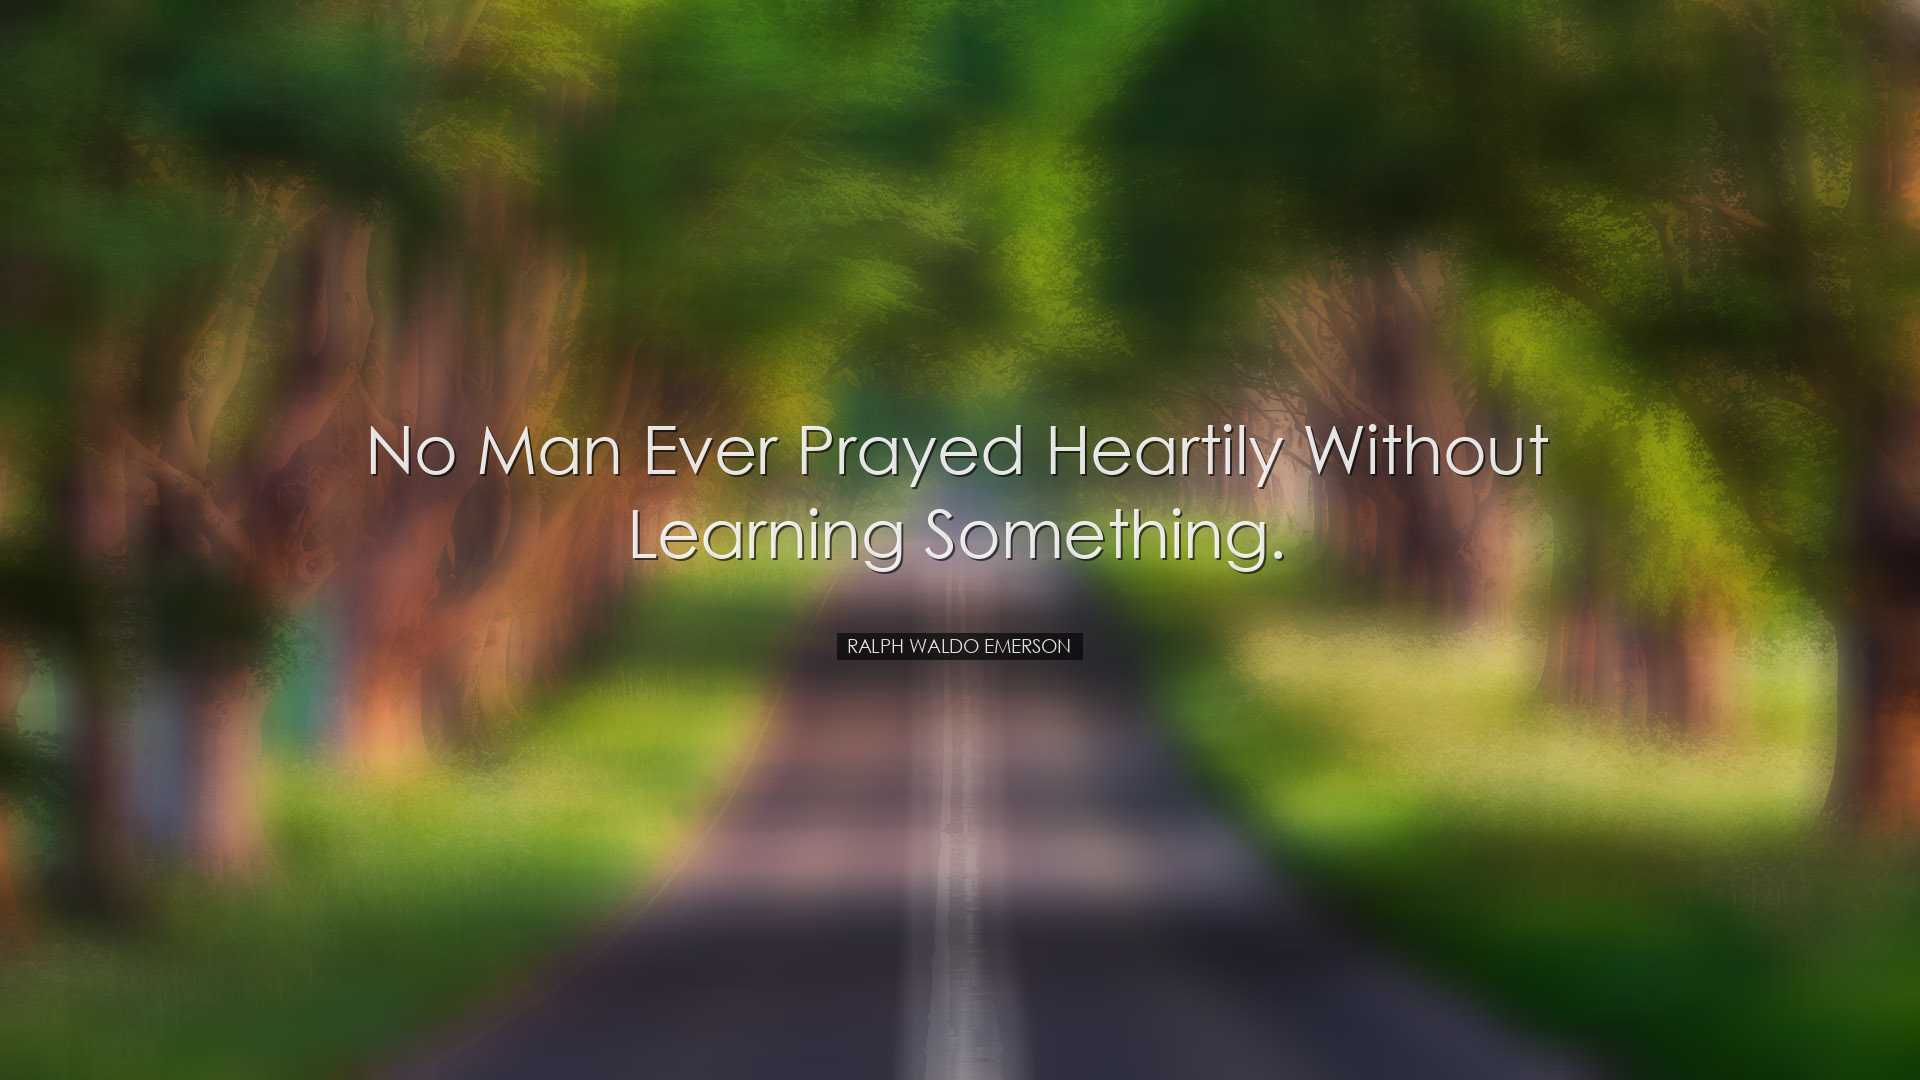 No man ever prayed heartily without learning something. - Ralph Wa